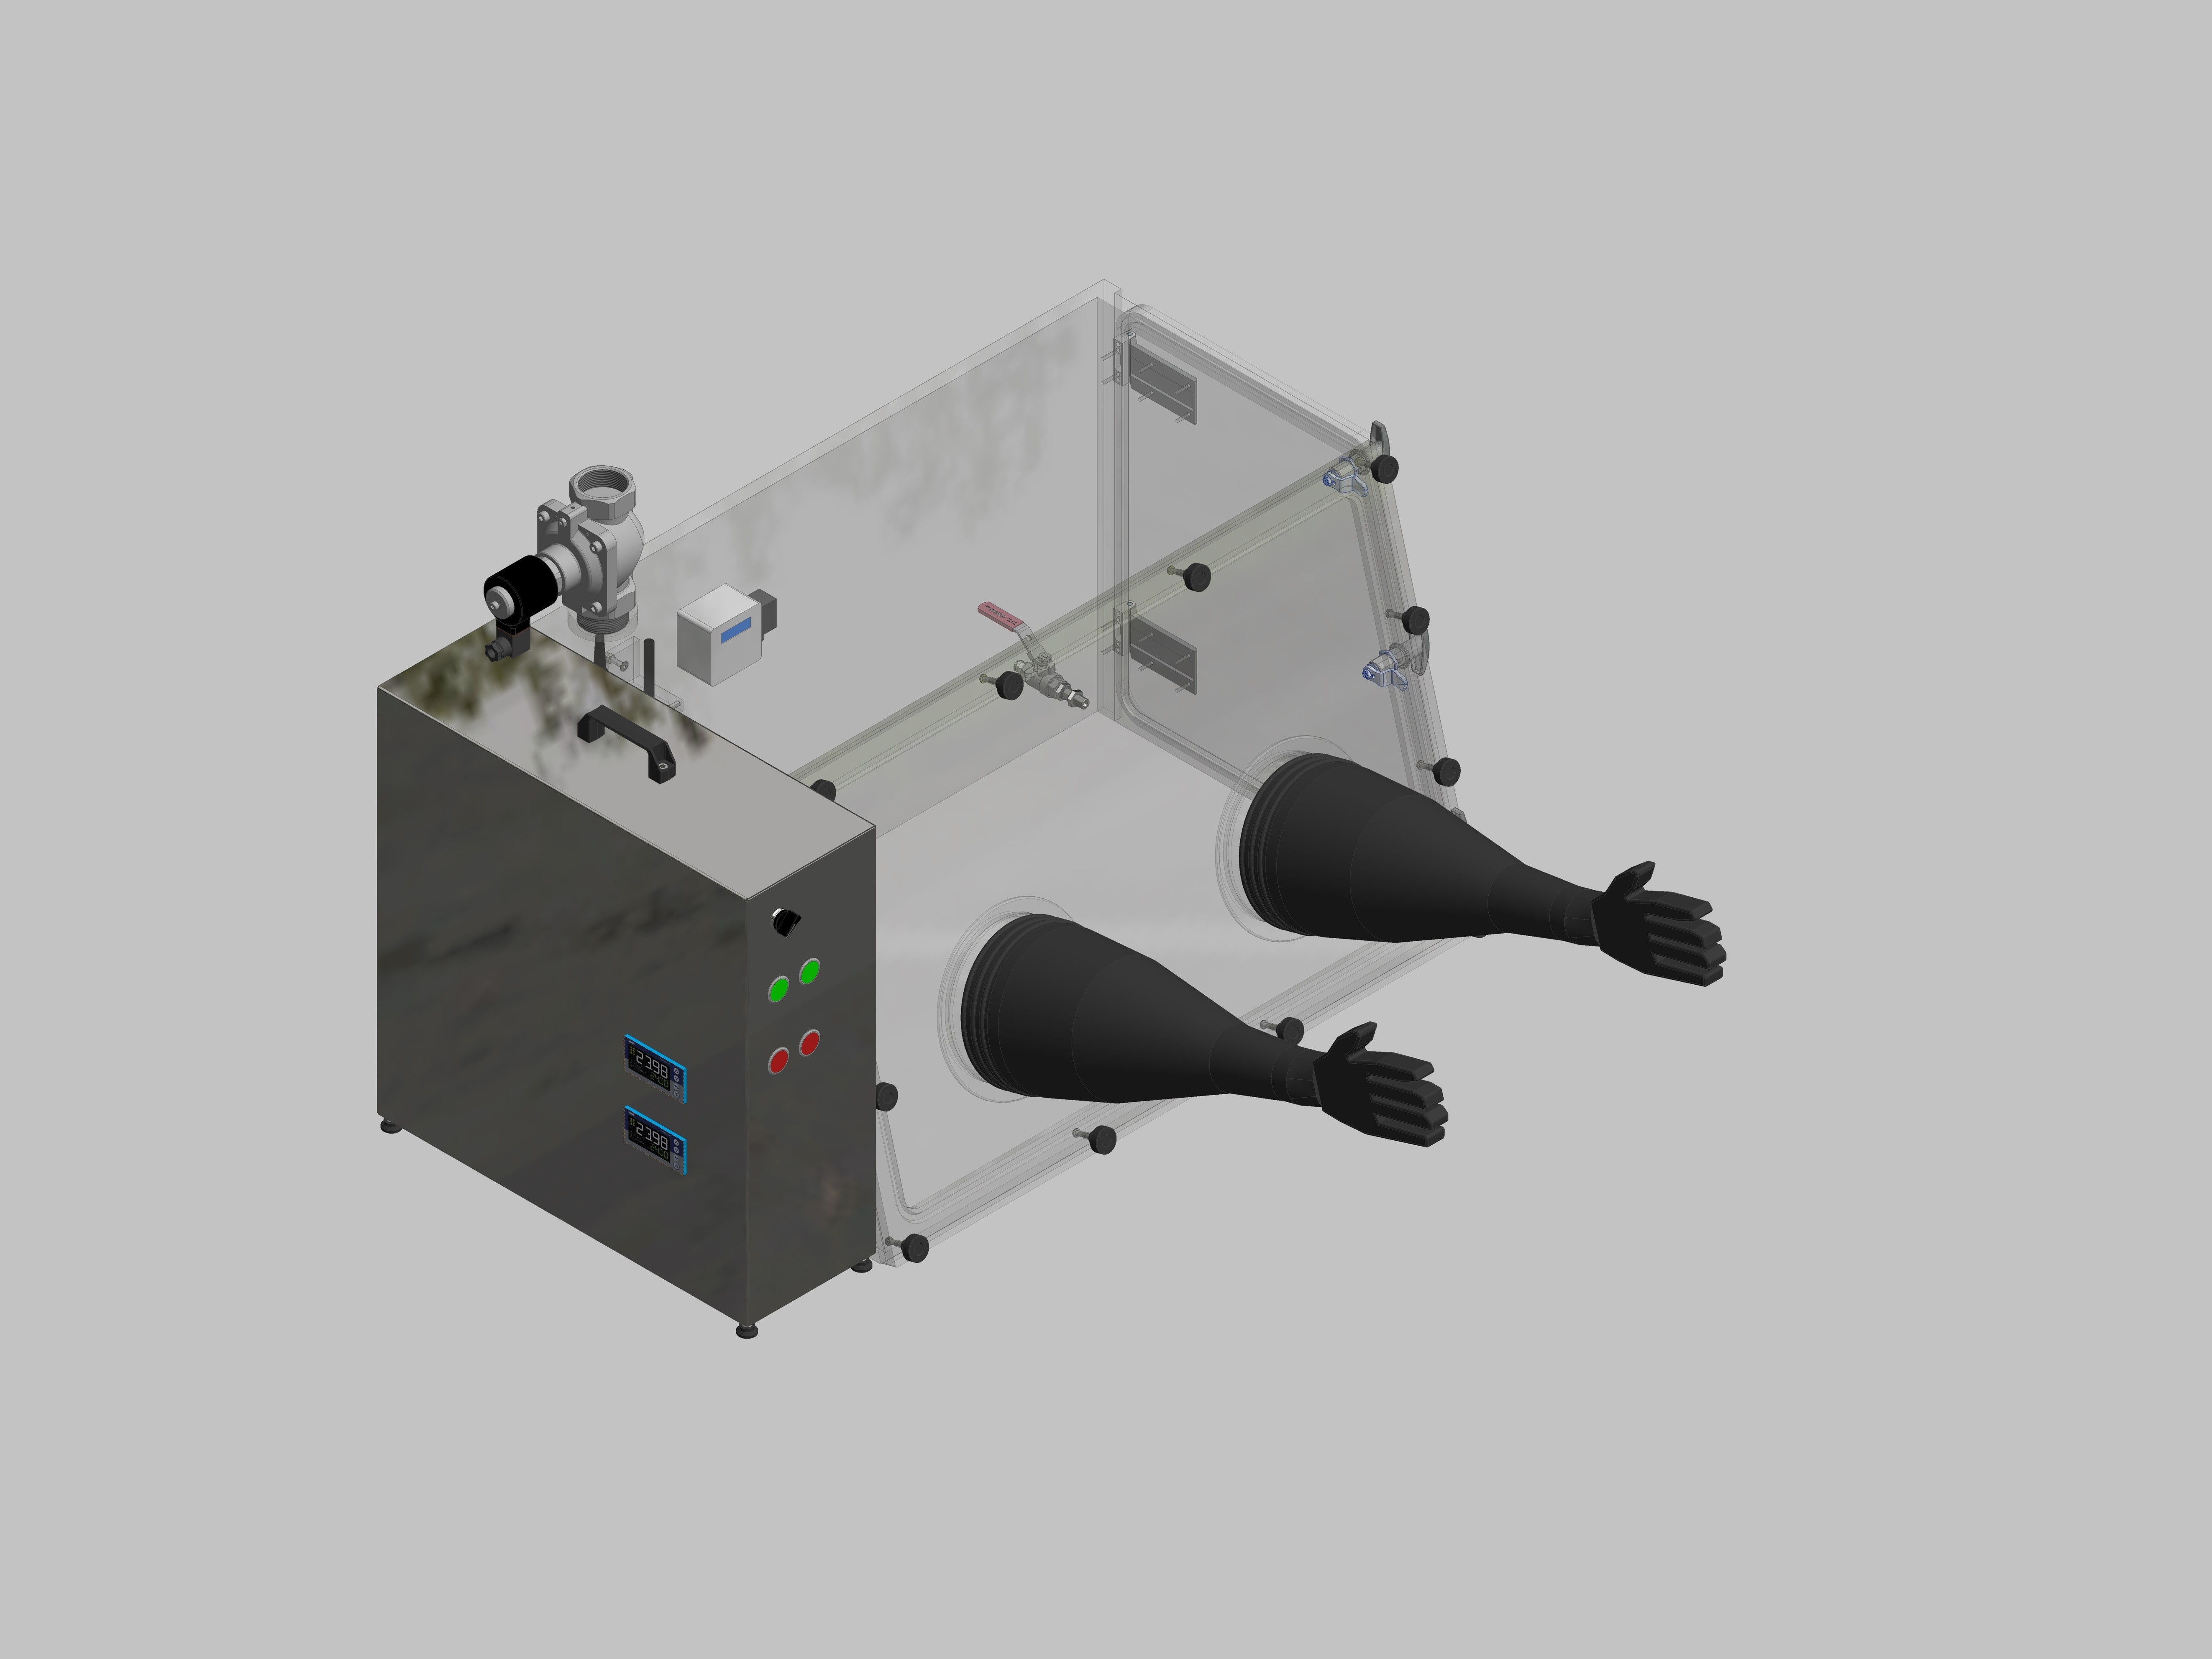 Glovebox made of acrylic &gt; Gas filling: automatic flushing with pressure control, front design: removable, side design: hinged doors, control: oxygen and humidity regulator